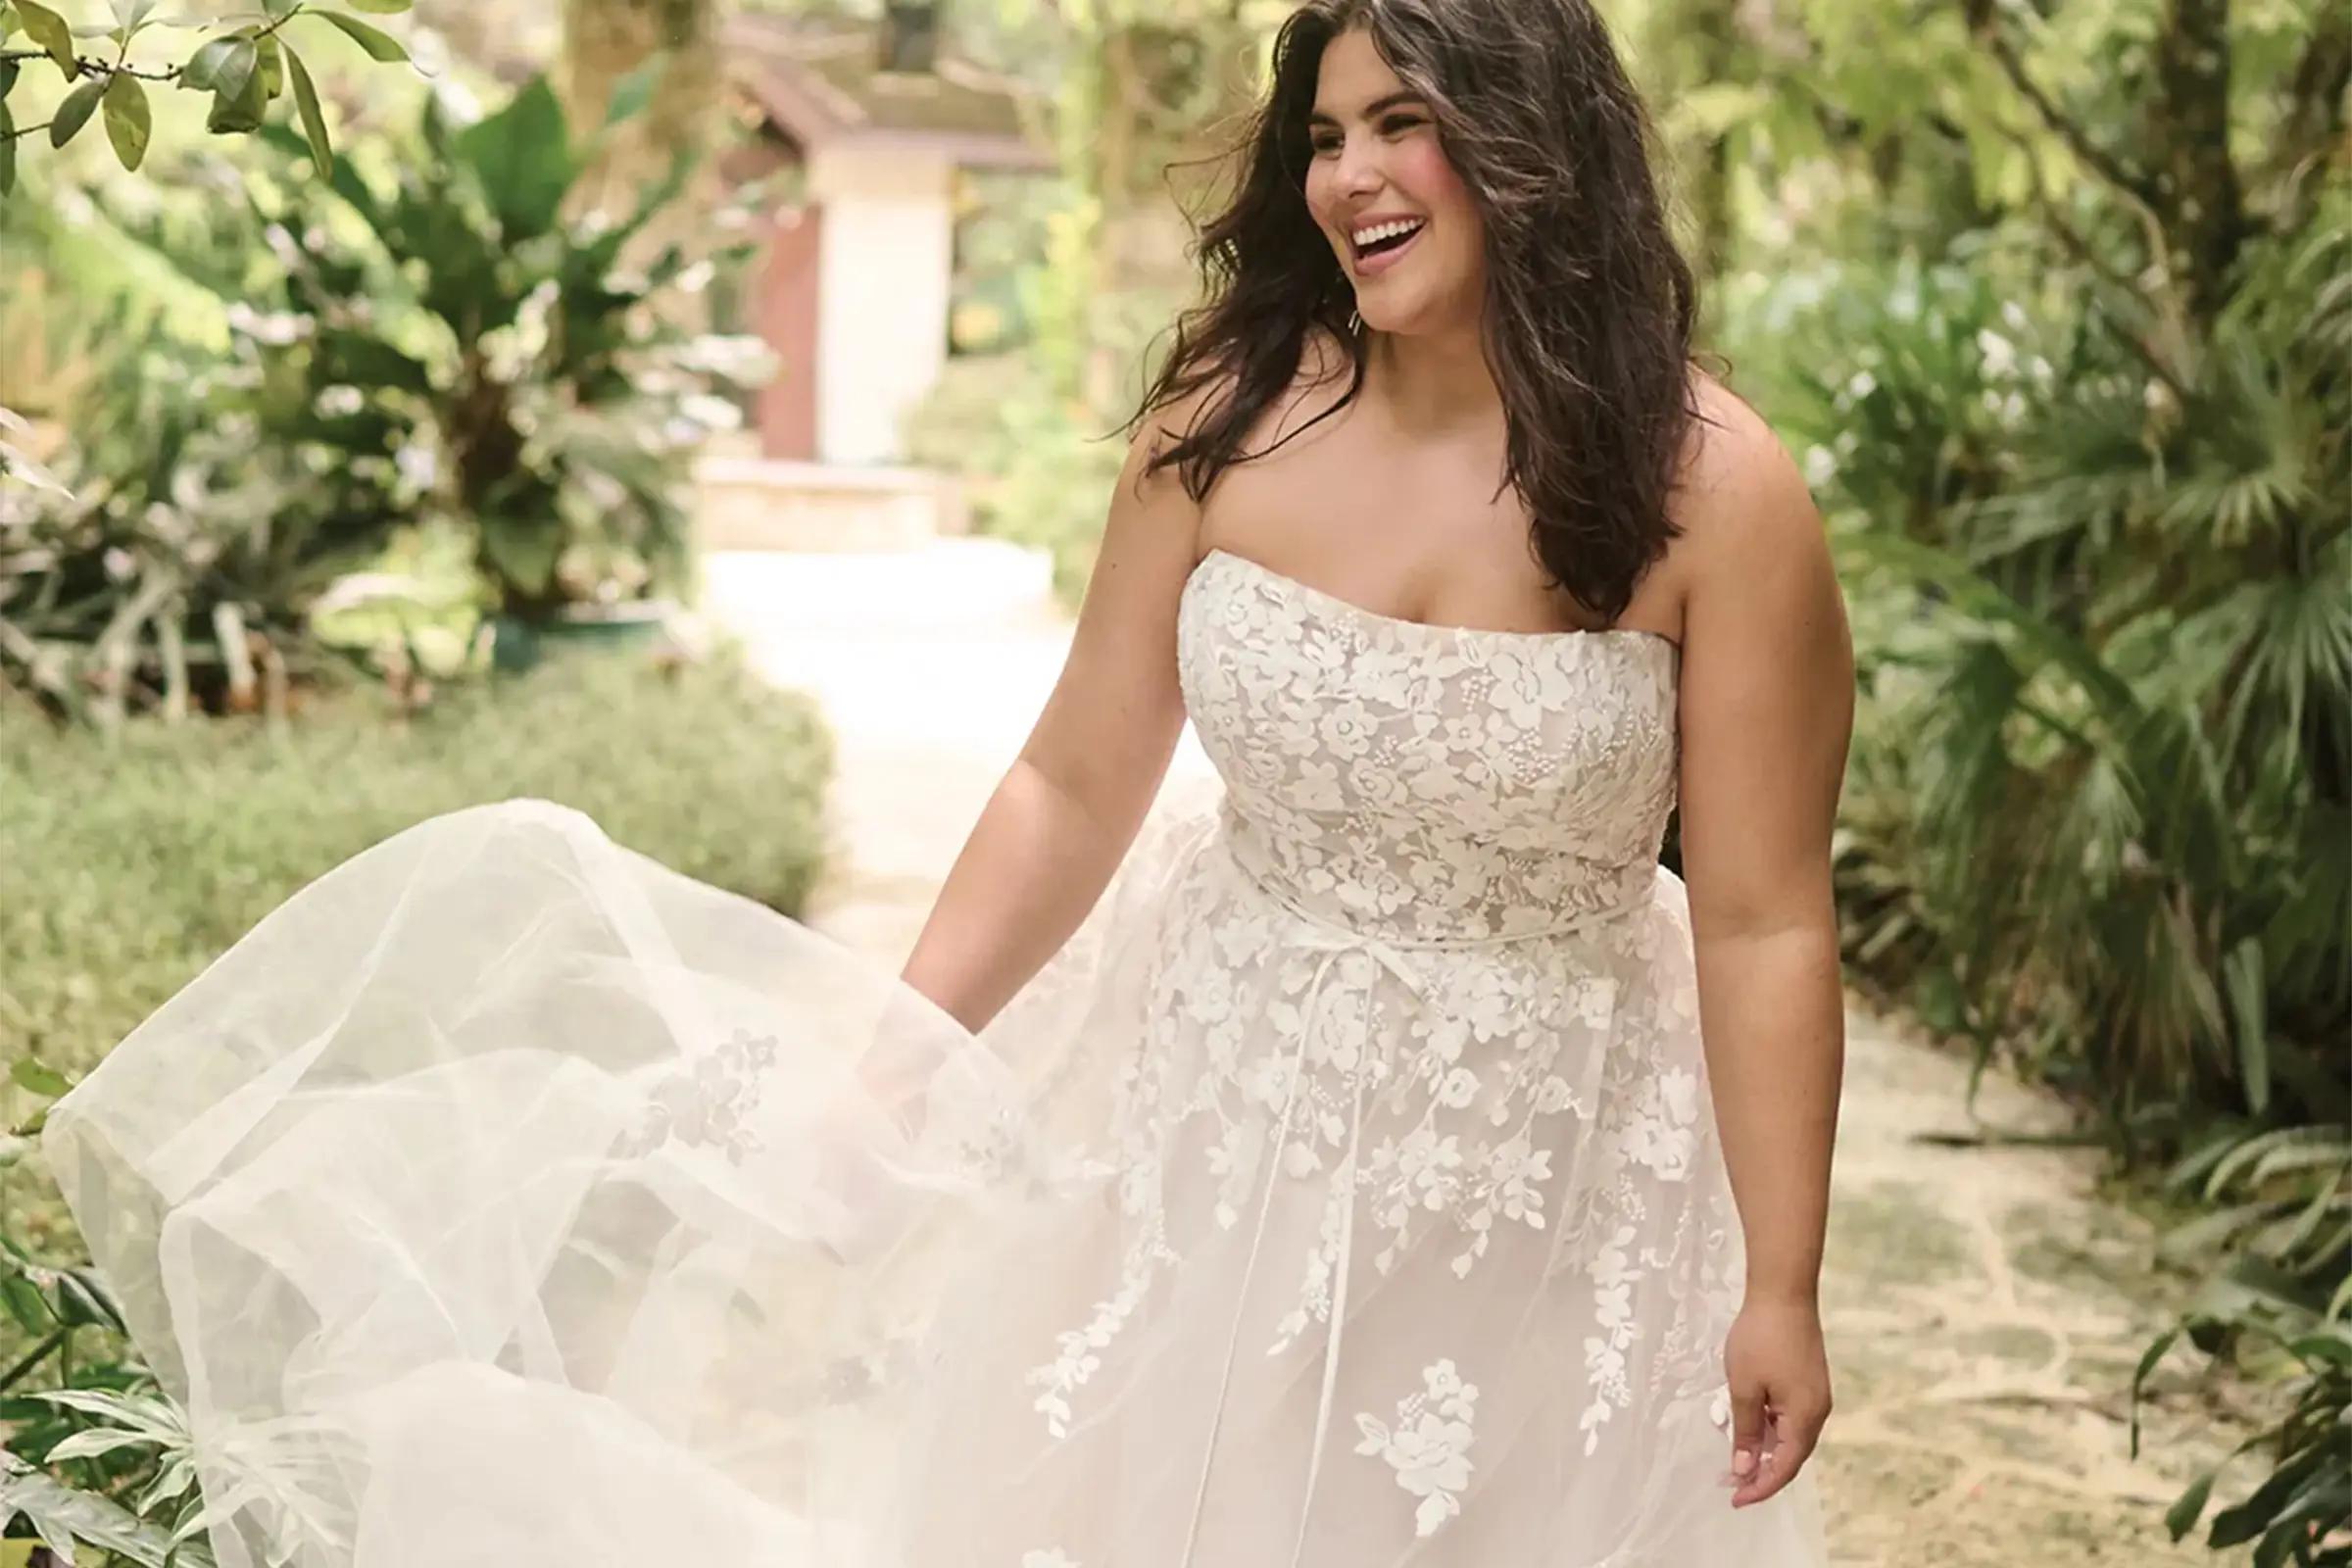 Plus size model wearing a white bridal gown